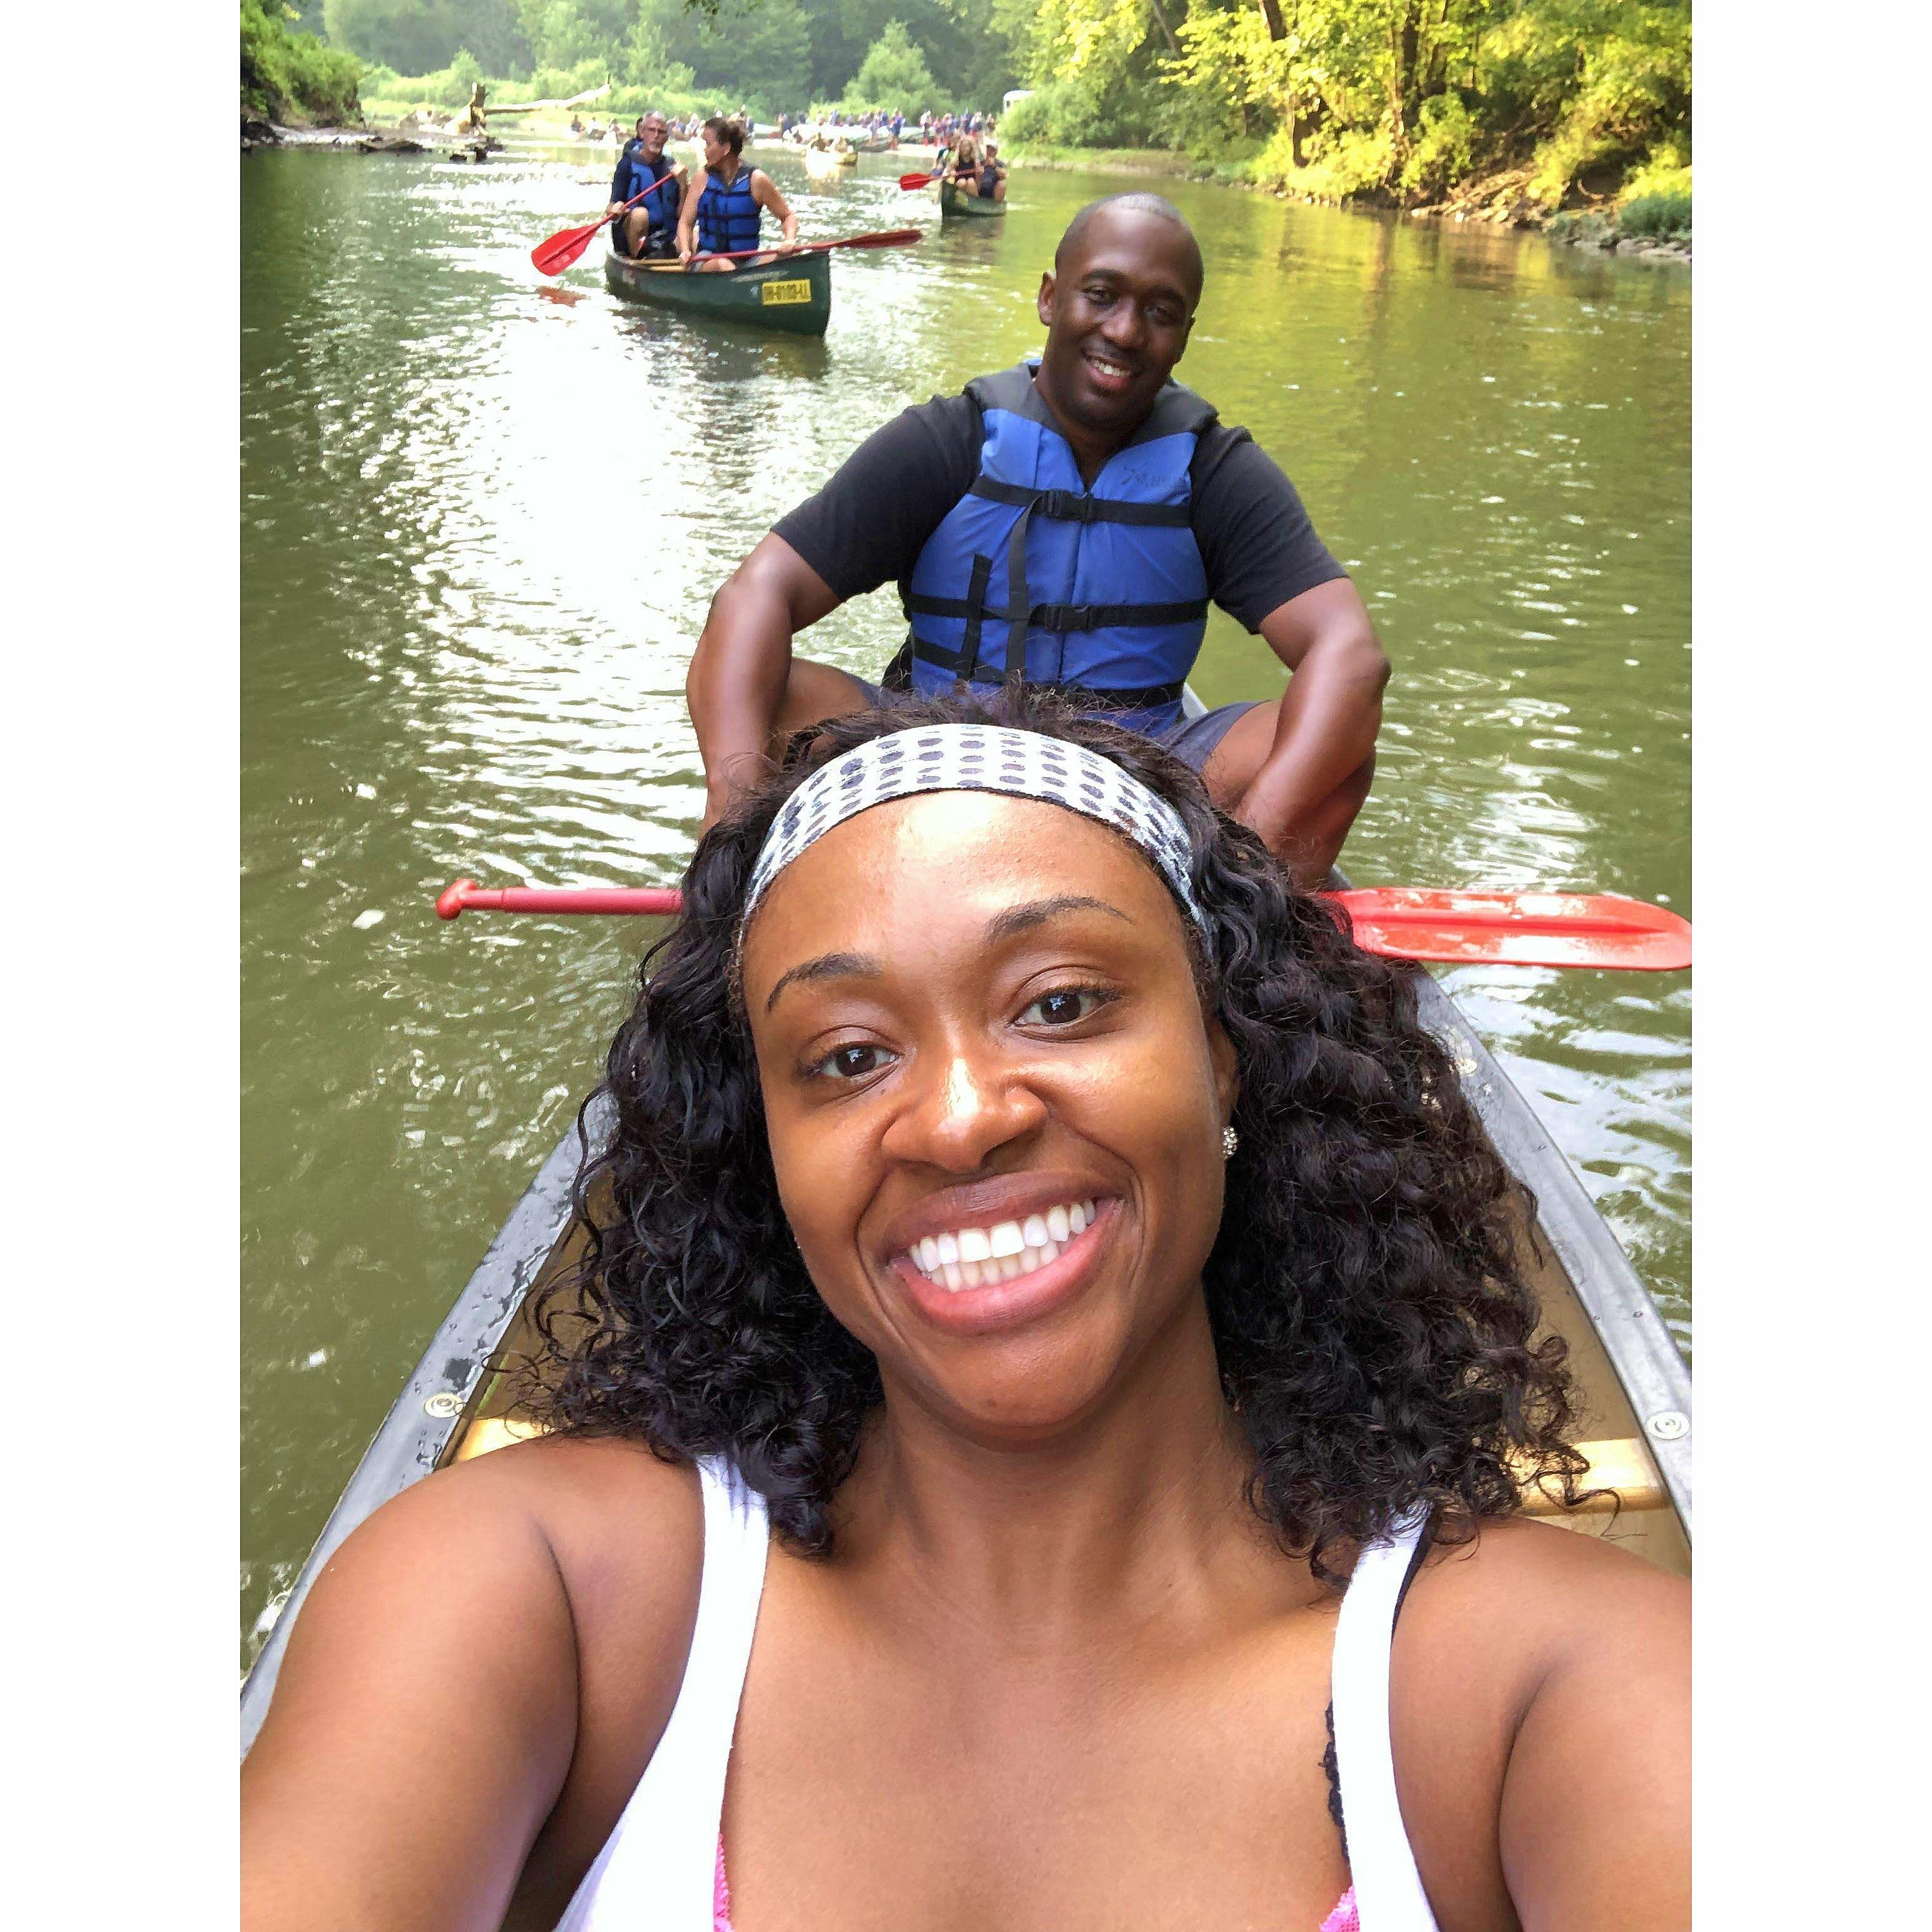 August 2019 - Our first date: Canoeing in Hocking Hills (He said I was rowing too slow and took over LOL)